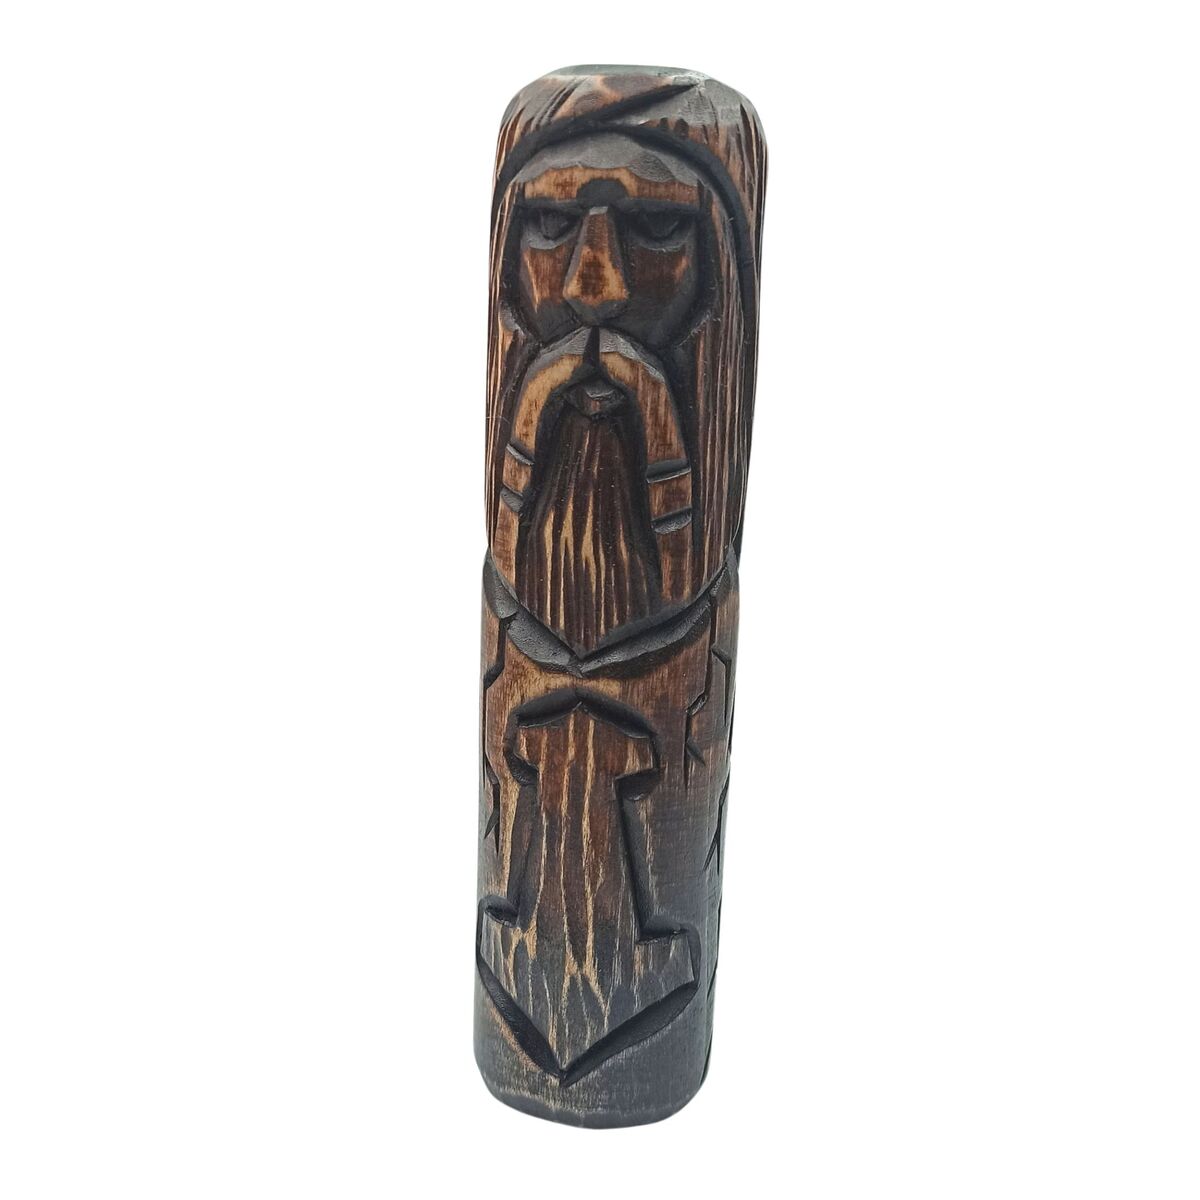 Norse God Thor wood carved figurine